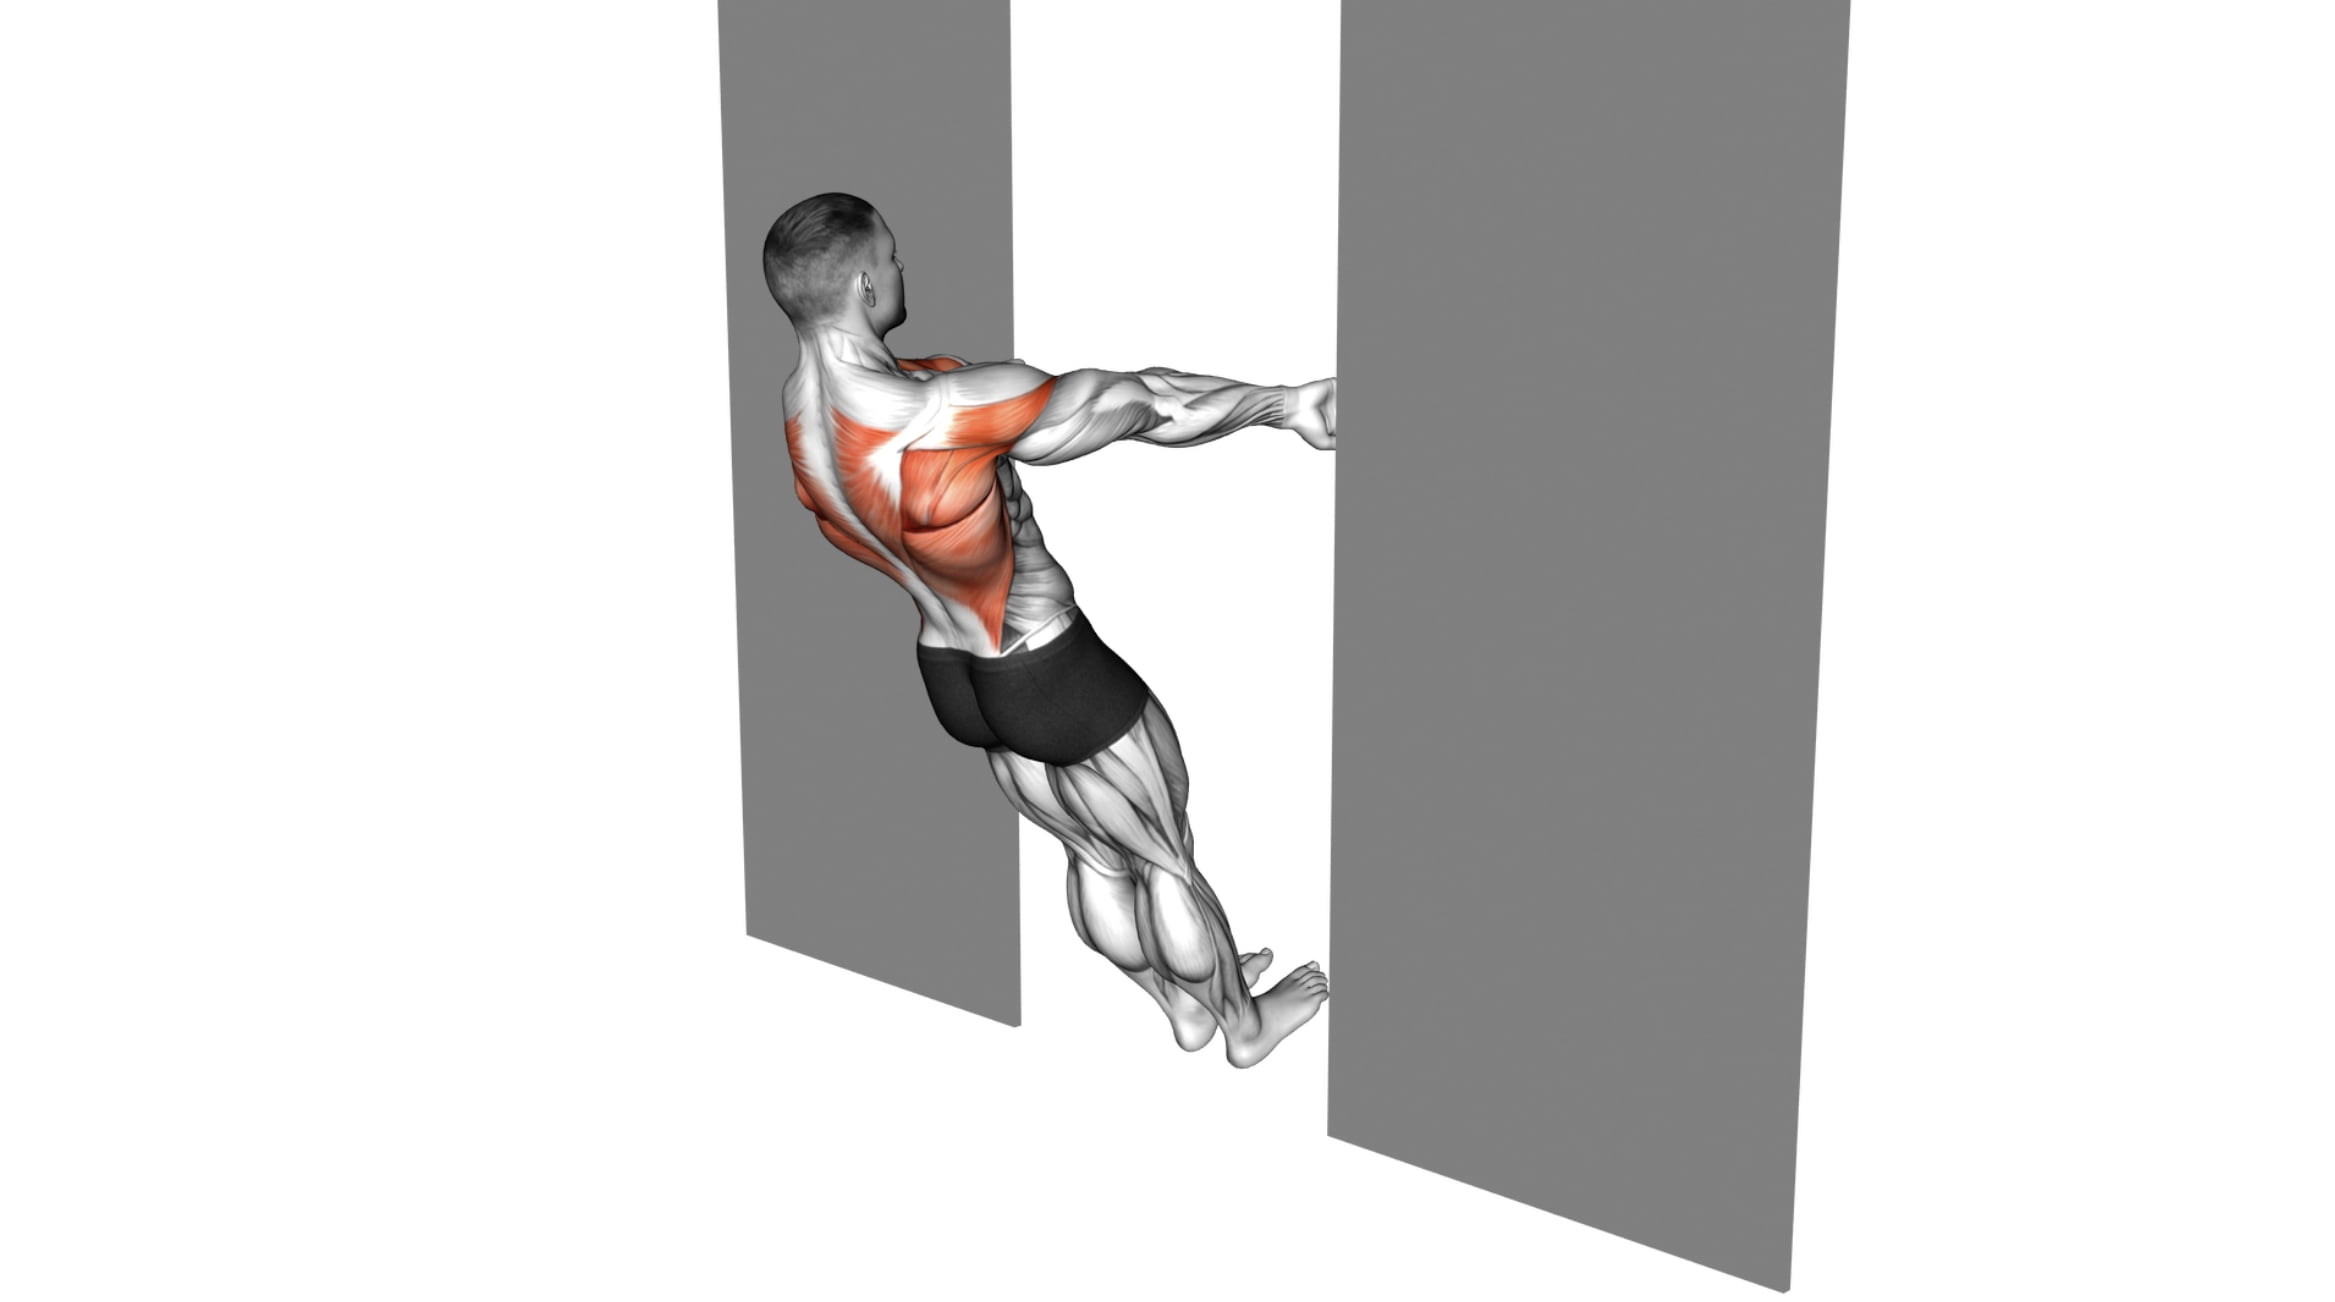 6 No Equipment Pull Exercises To Strengthen Your Back At Home